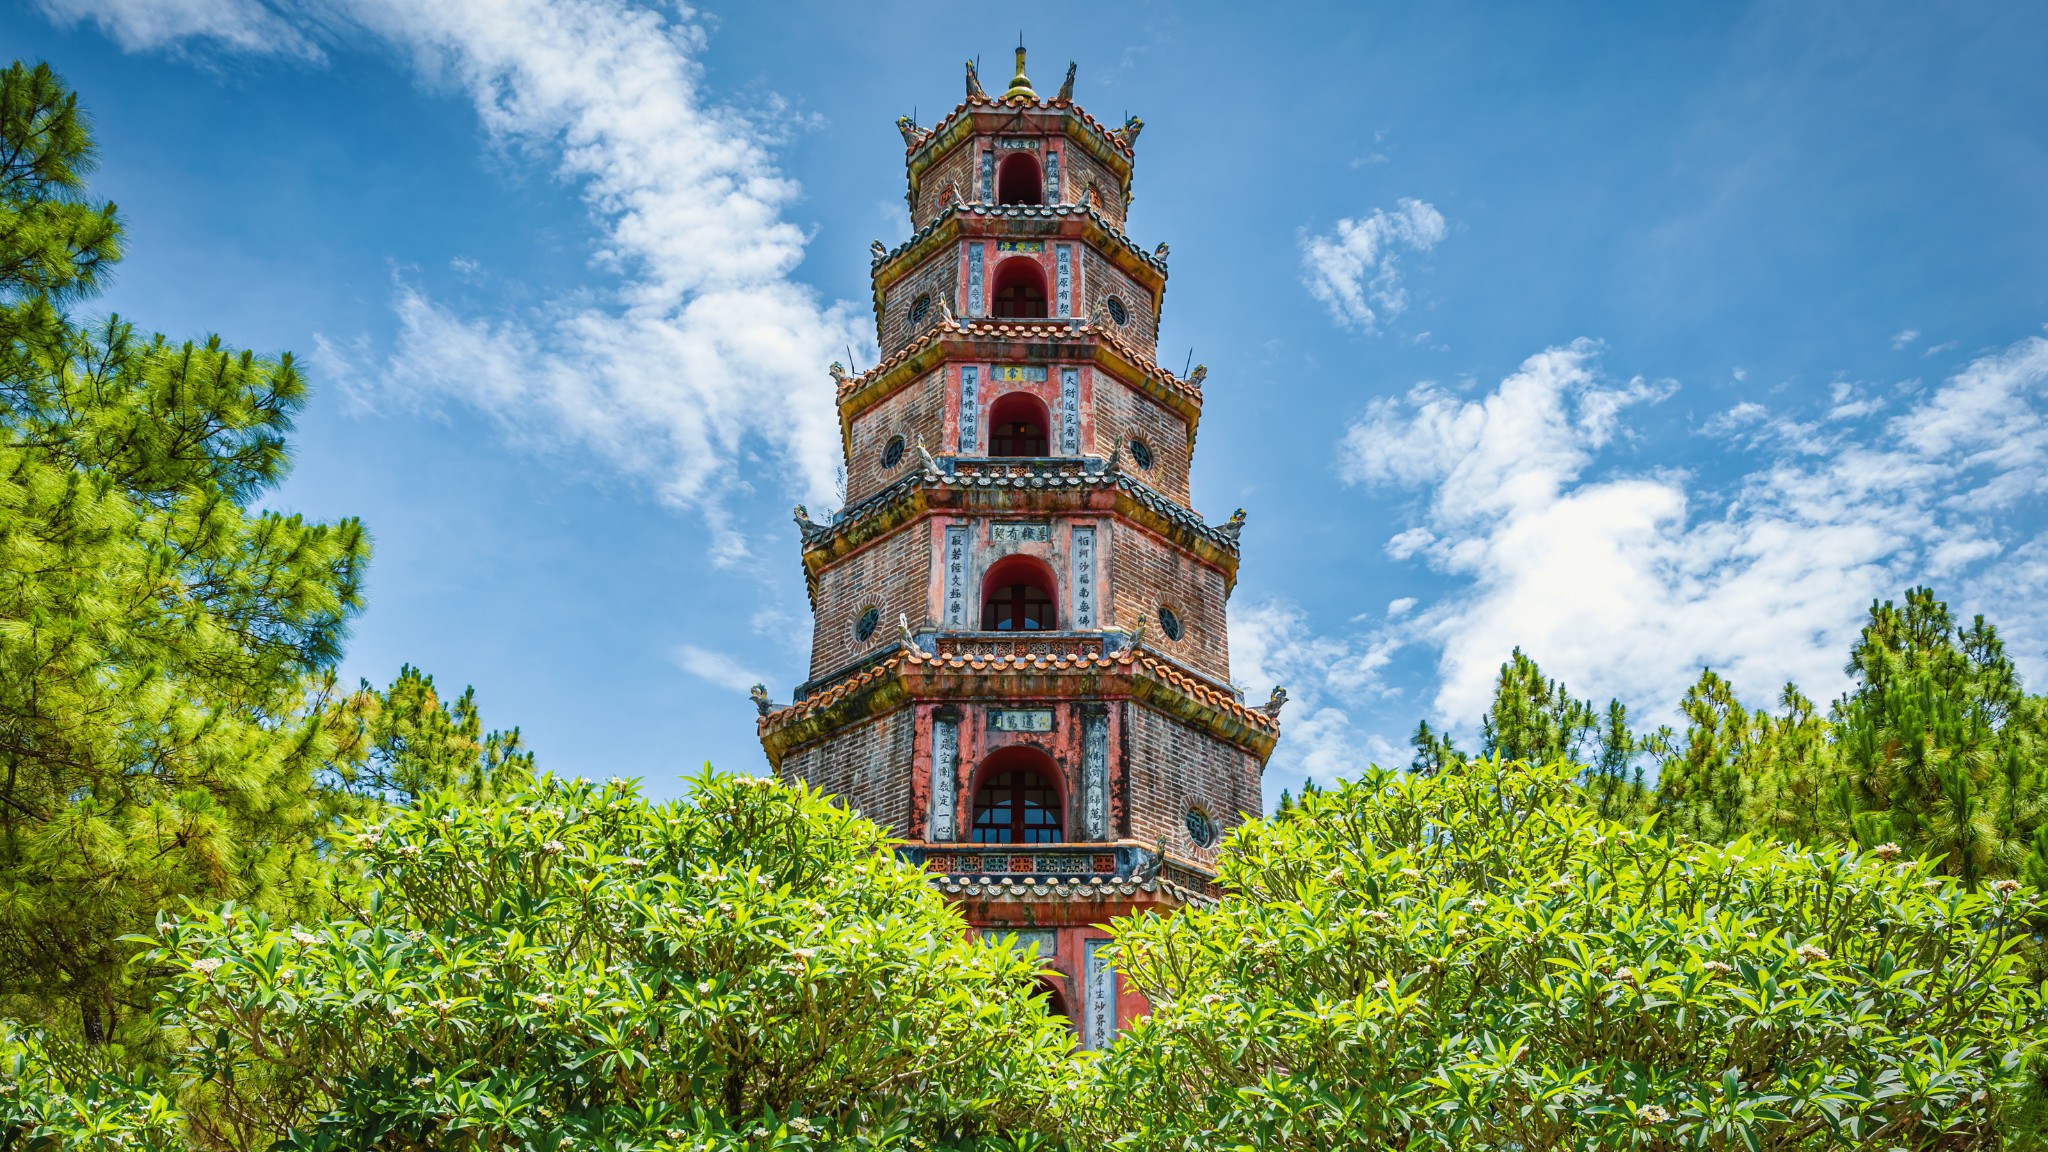 Day 7 Marvel At The Architecture Of Thien Mu Pagoda